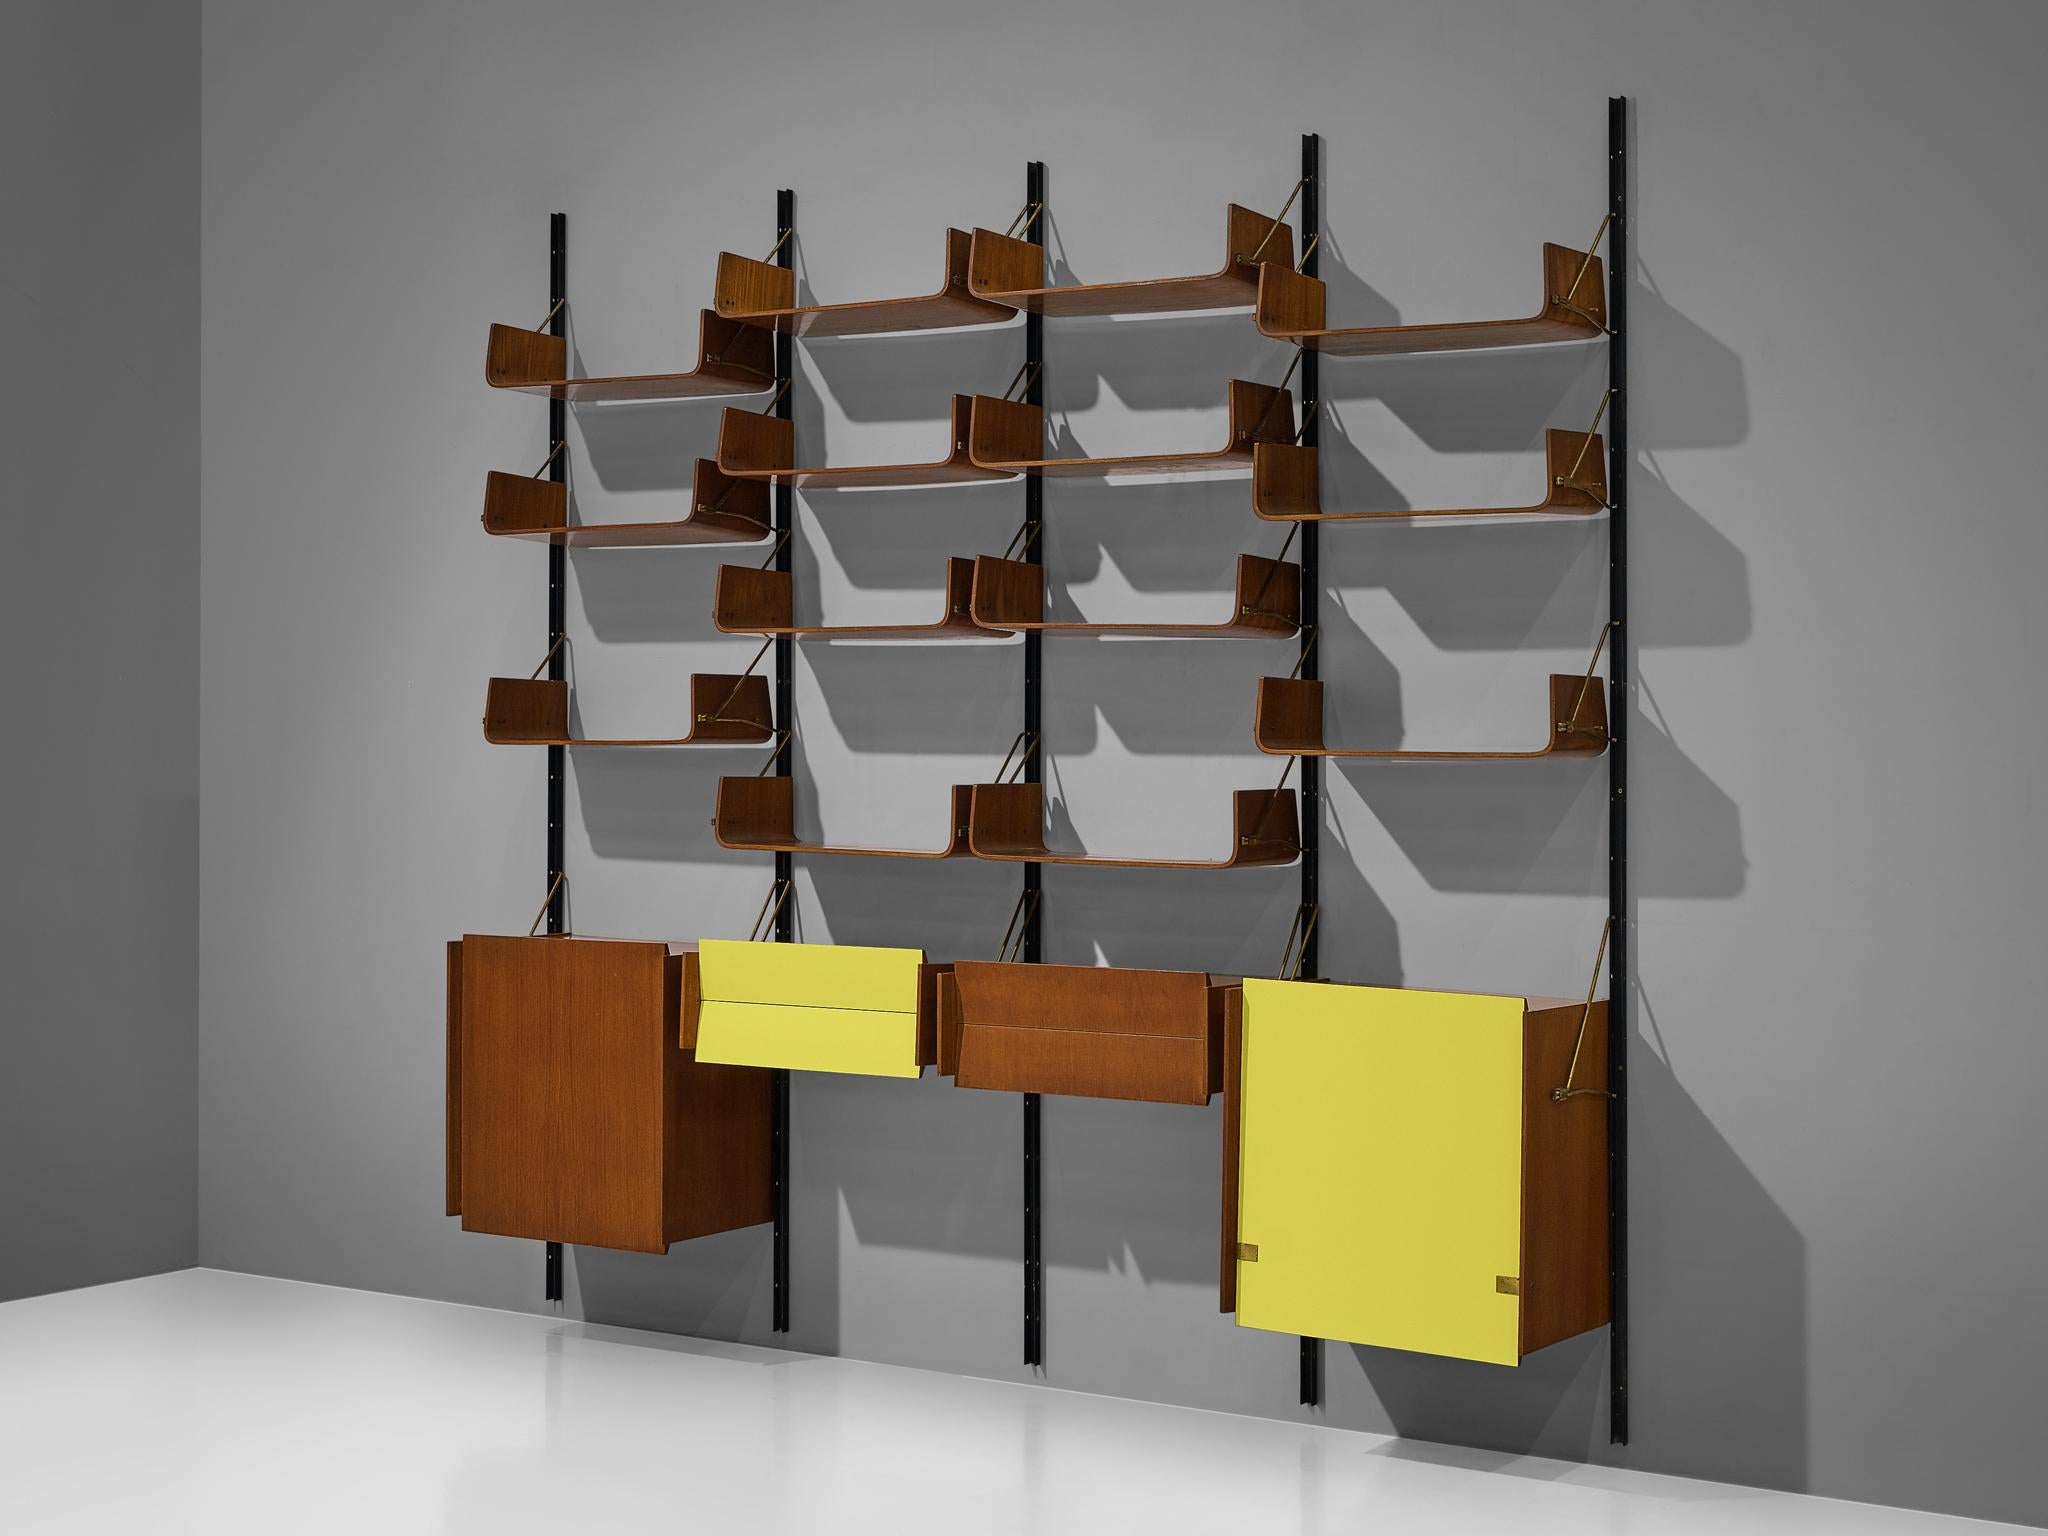 Wall unit, walnut, plywood, brass, black lacquered metal, Italy, 1950s

Large Italian wall unit in four sections. All sections have cabinets and several shelves that are adjustable at any height. The shelves are made of bent plywood that is curved